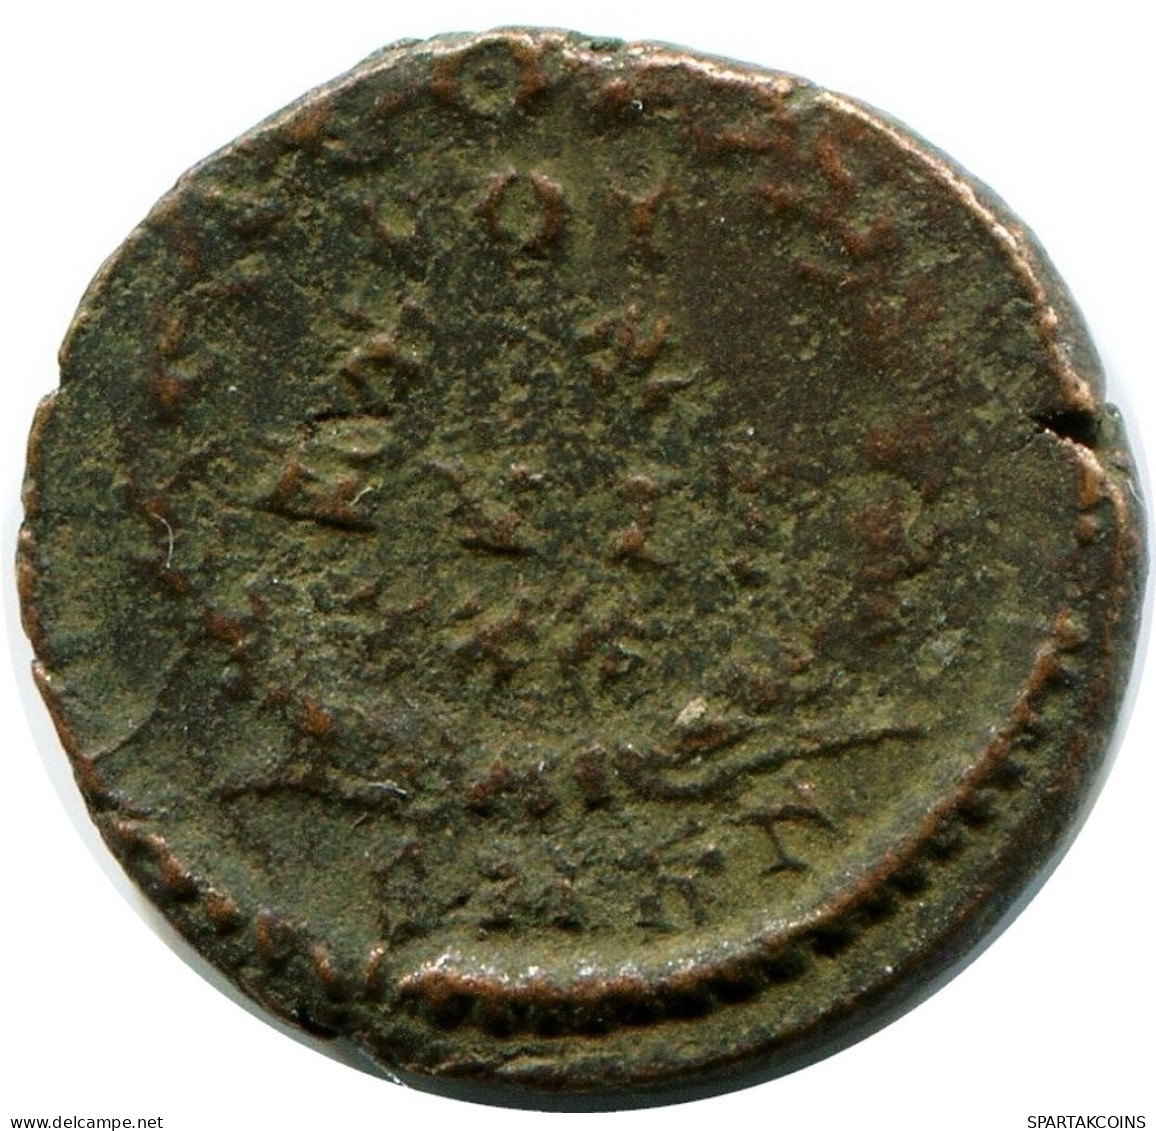 CONSTANS MINTED IN CYZICUS FROM THE ROYAL ONTARIO MUSEUM #ANC11589.14.F.A - The Christian Empire (307 AD To 363 AD)